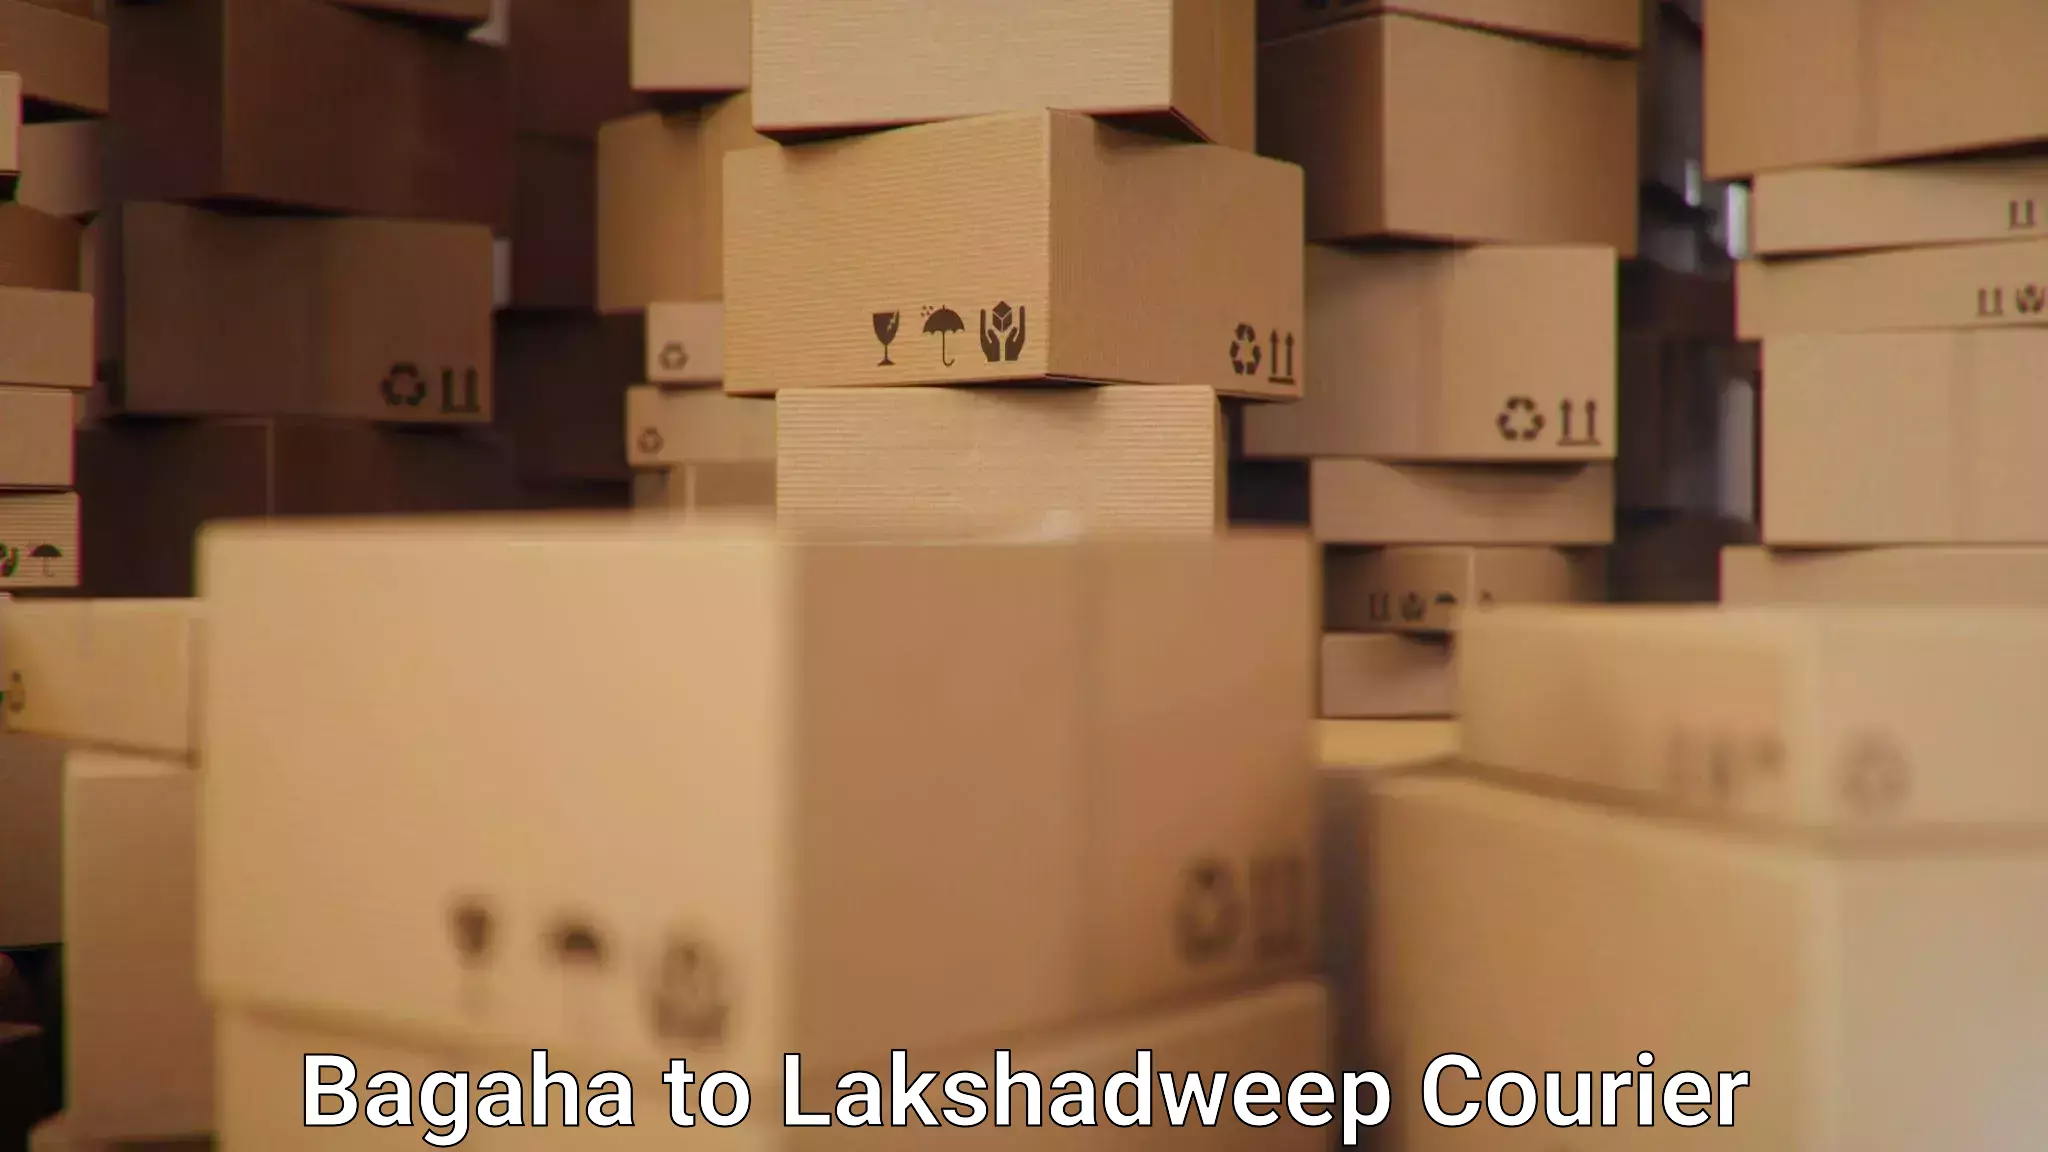 24-hour courier service Bagaha to Lakshadweep